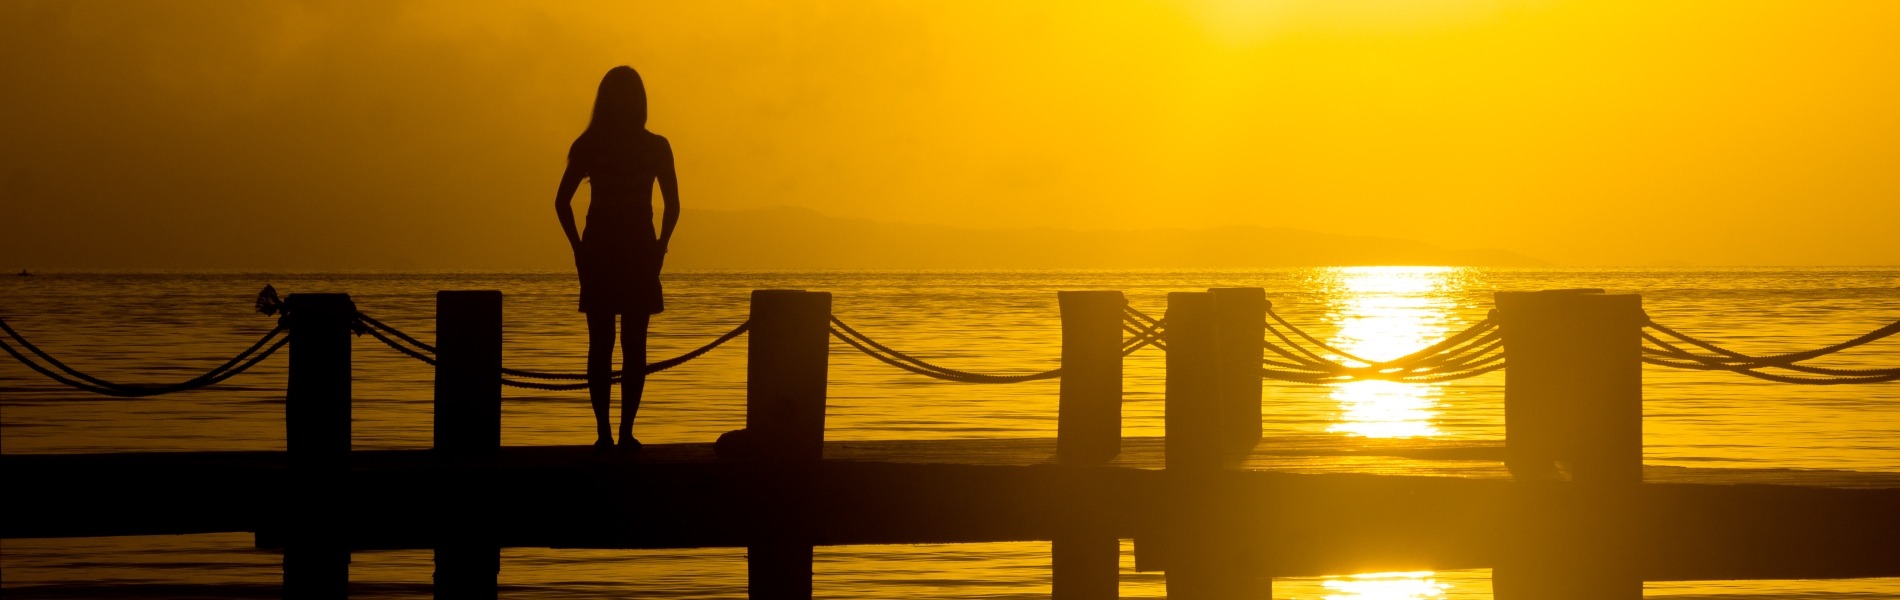 Image of a woman on a jetty with a sunset